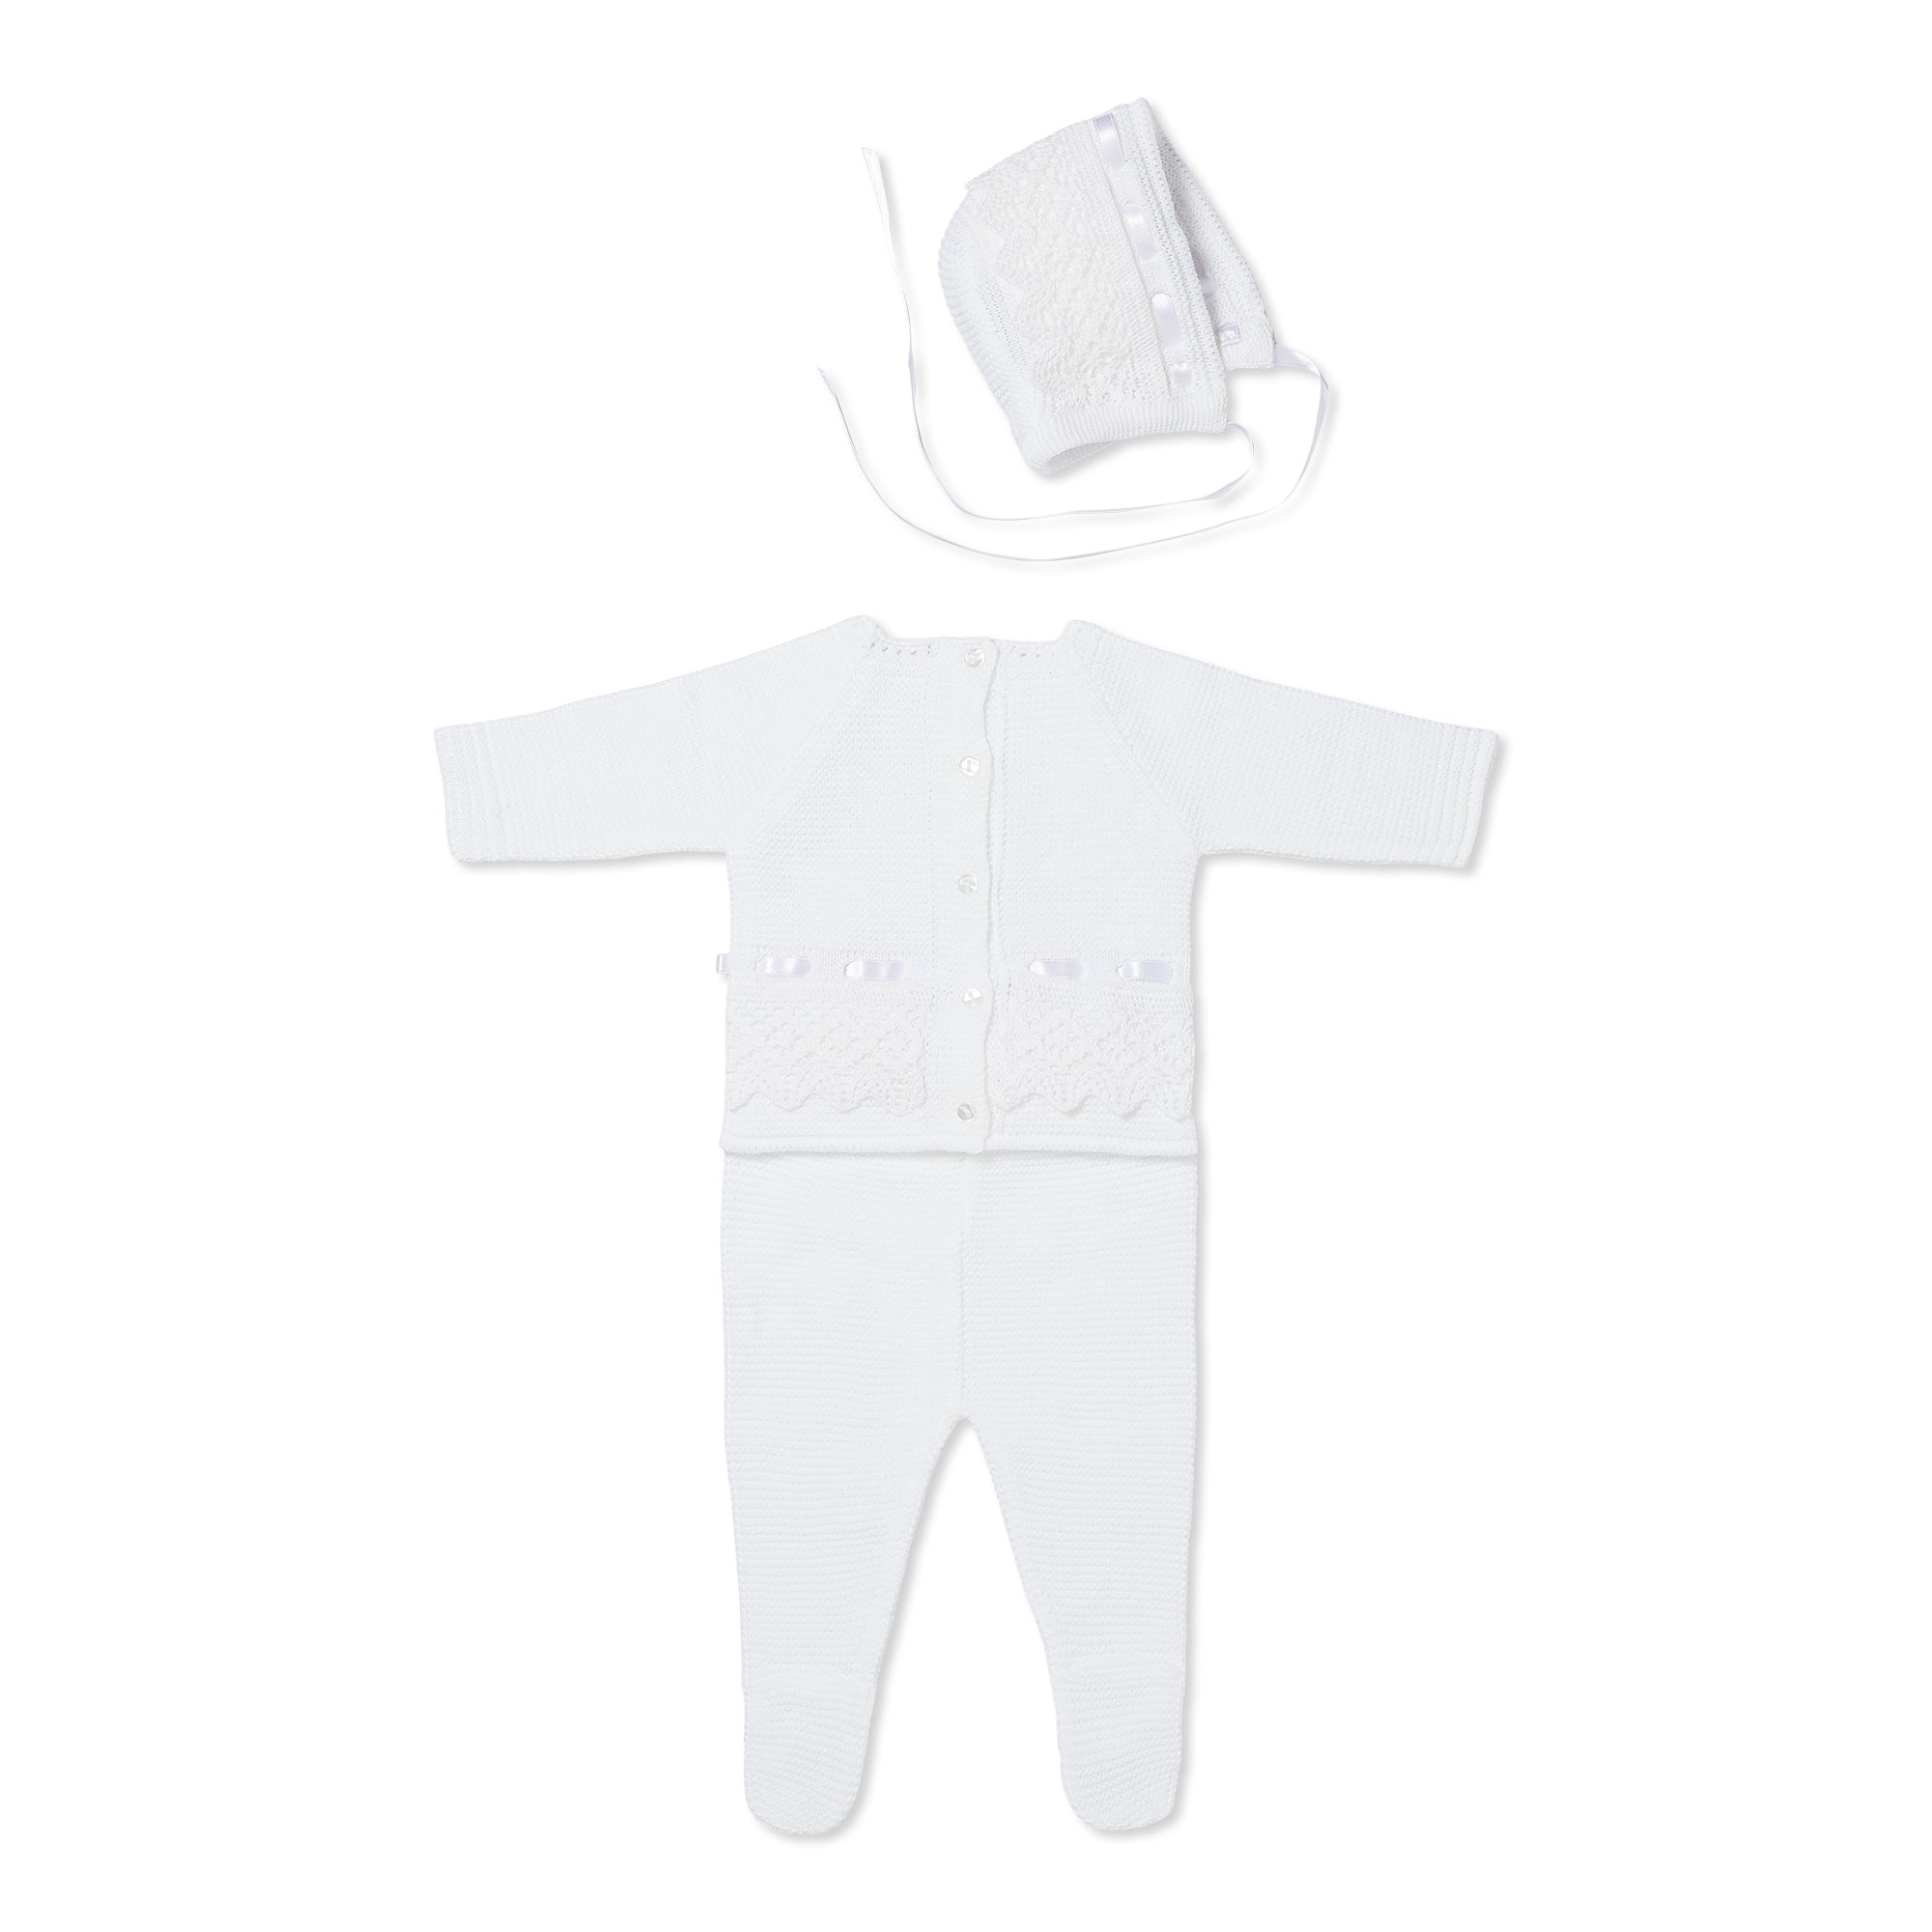 Set of knitted baby clothes in milk white color - Baby sets - ADDIPA style  - Shop